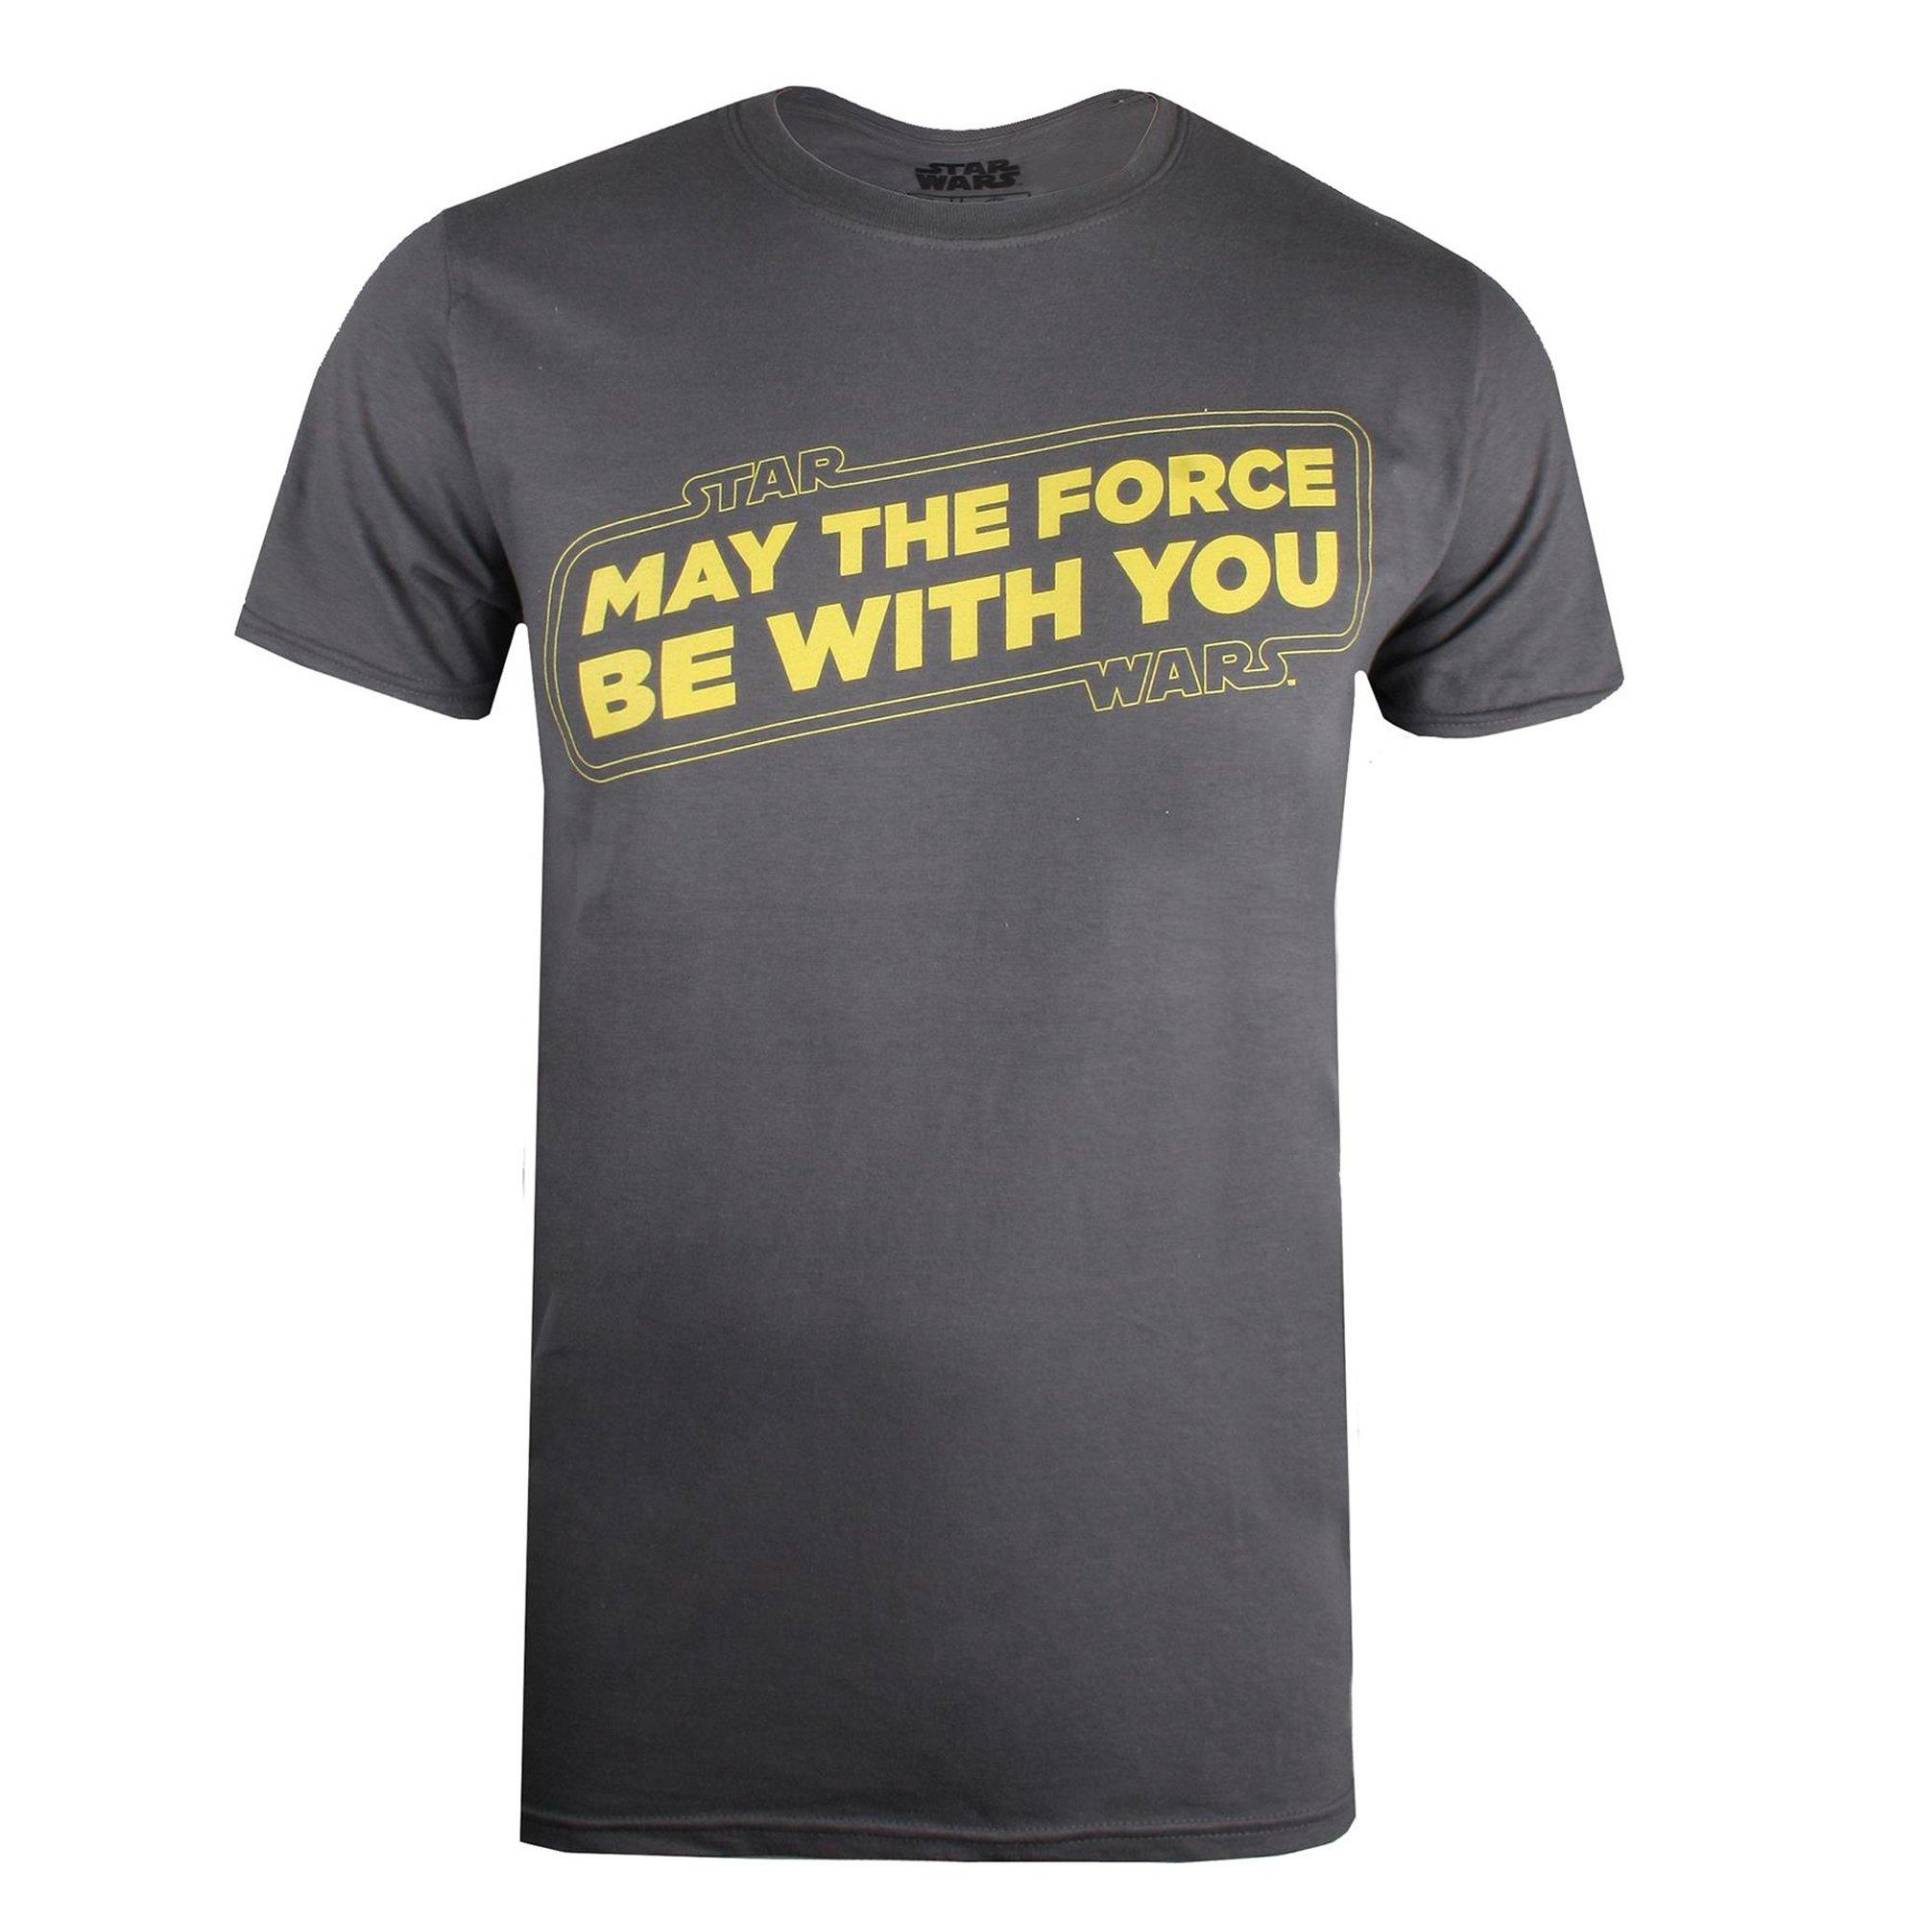 May The Force Be With You Tshirt Herren Charcoal Black S von STAR WARS